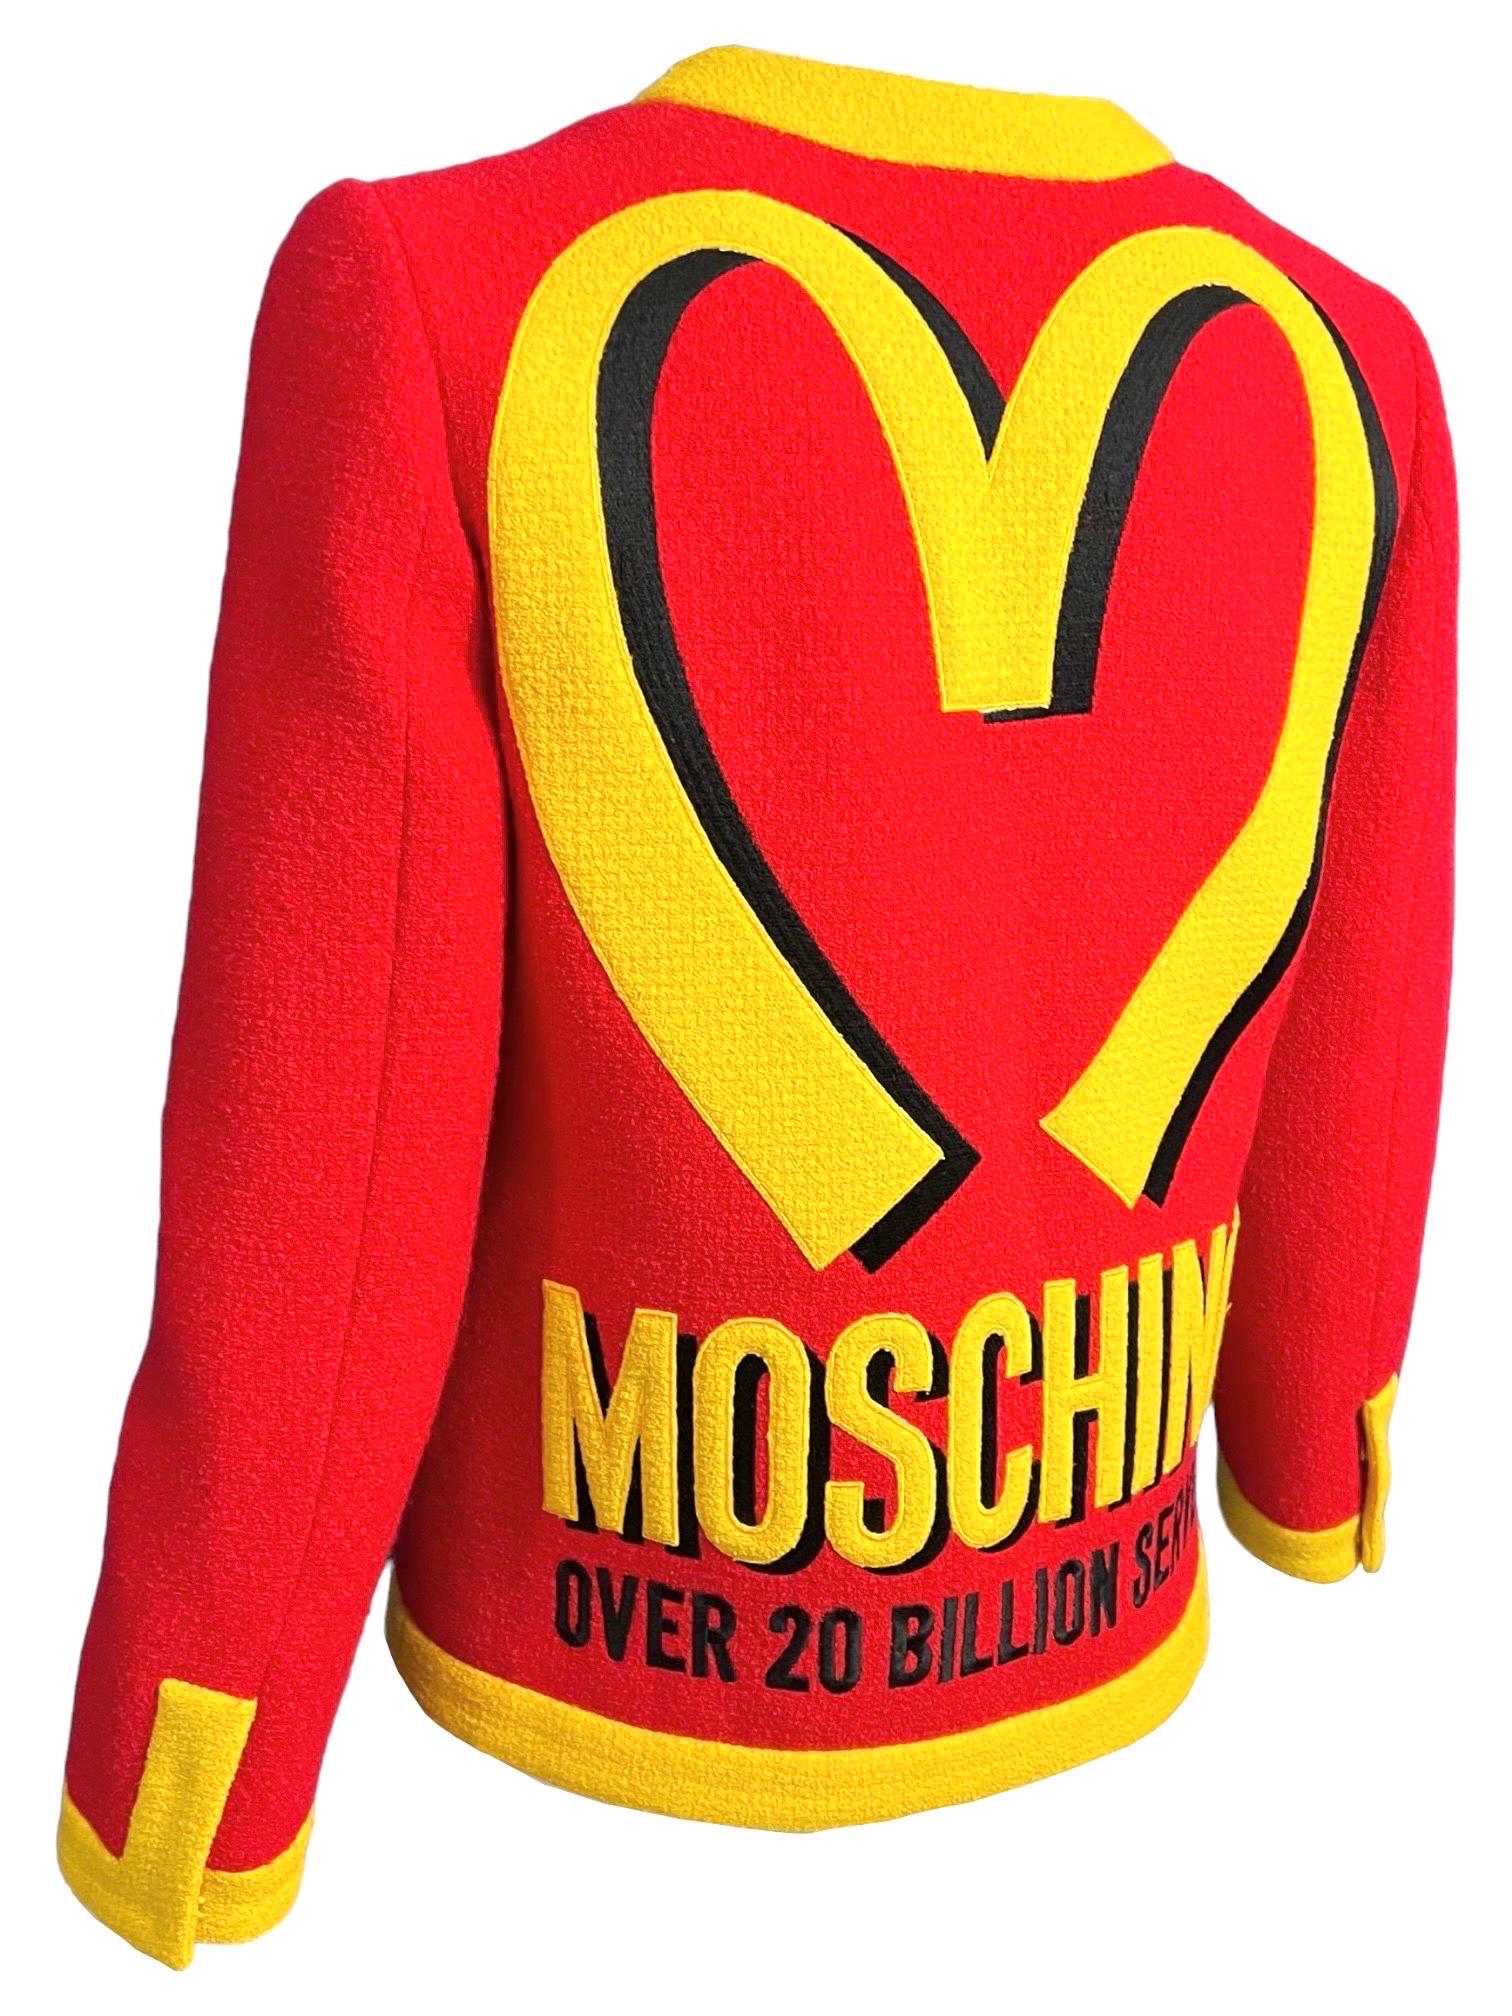 Moschino Couture McDonalds Runway Tweed Blazer F/W 2014 For Sale 3